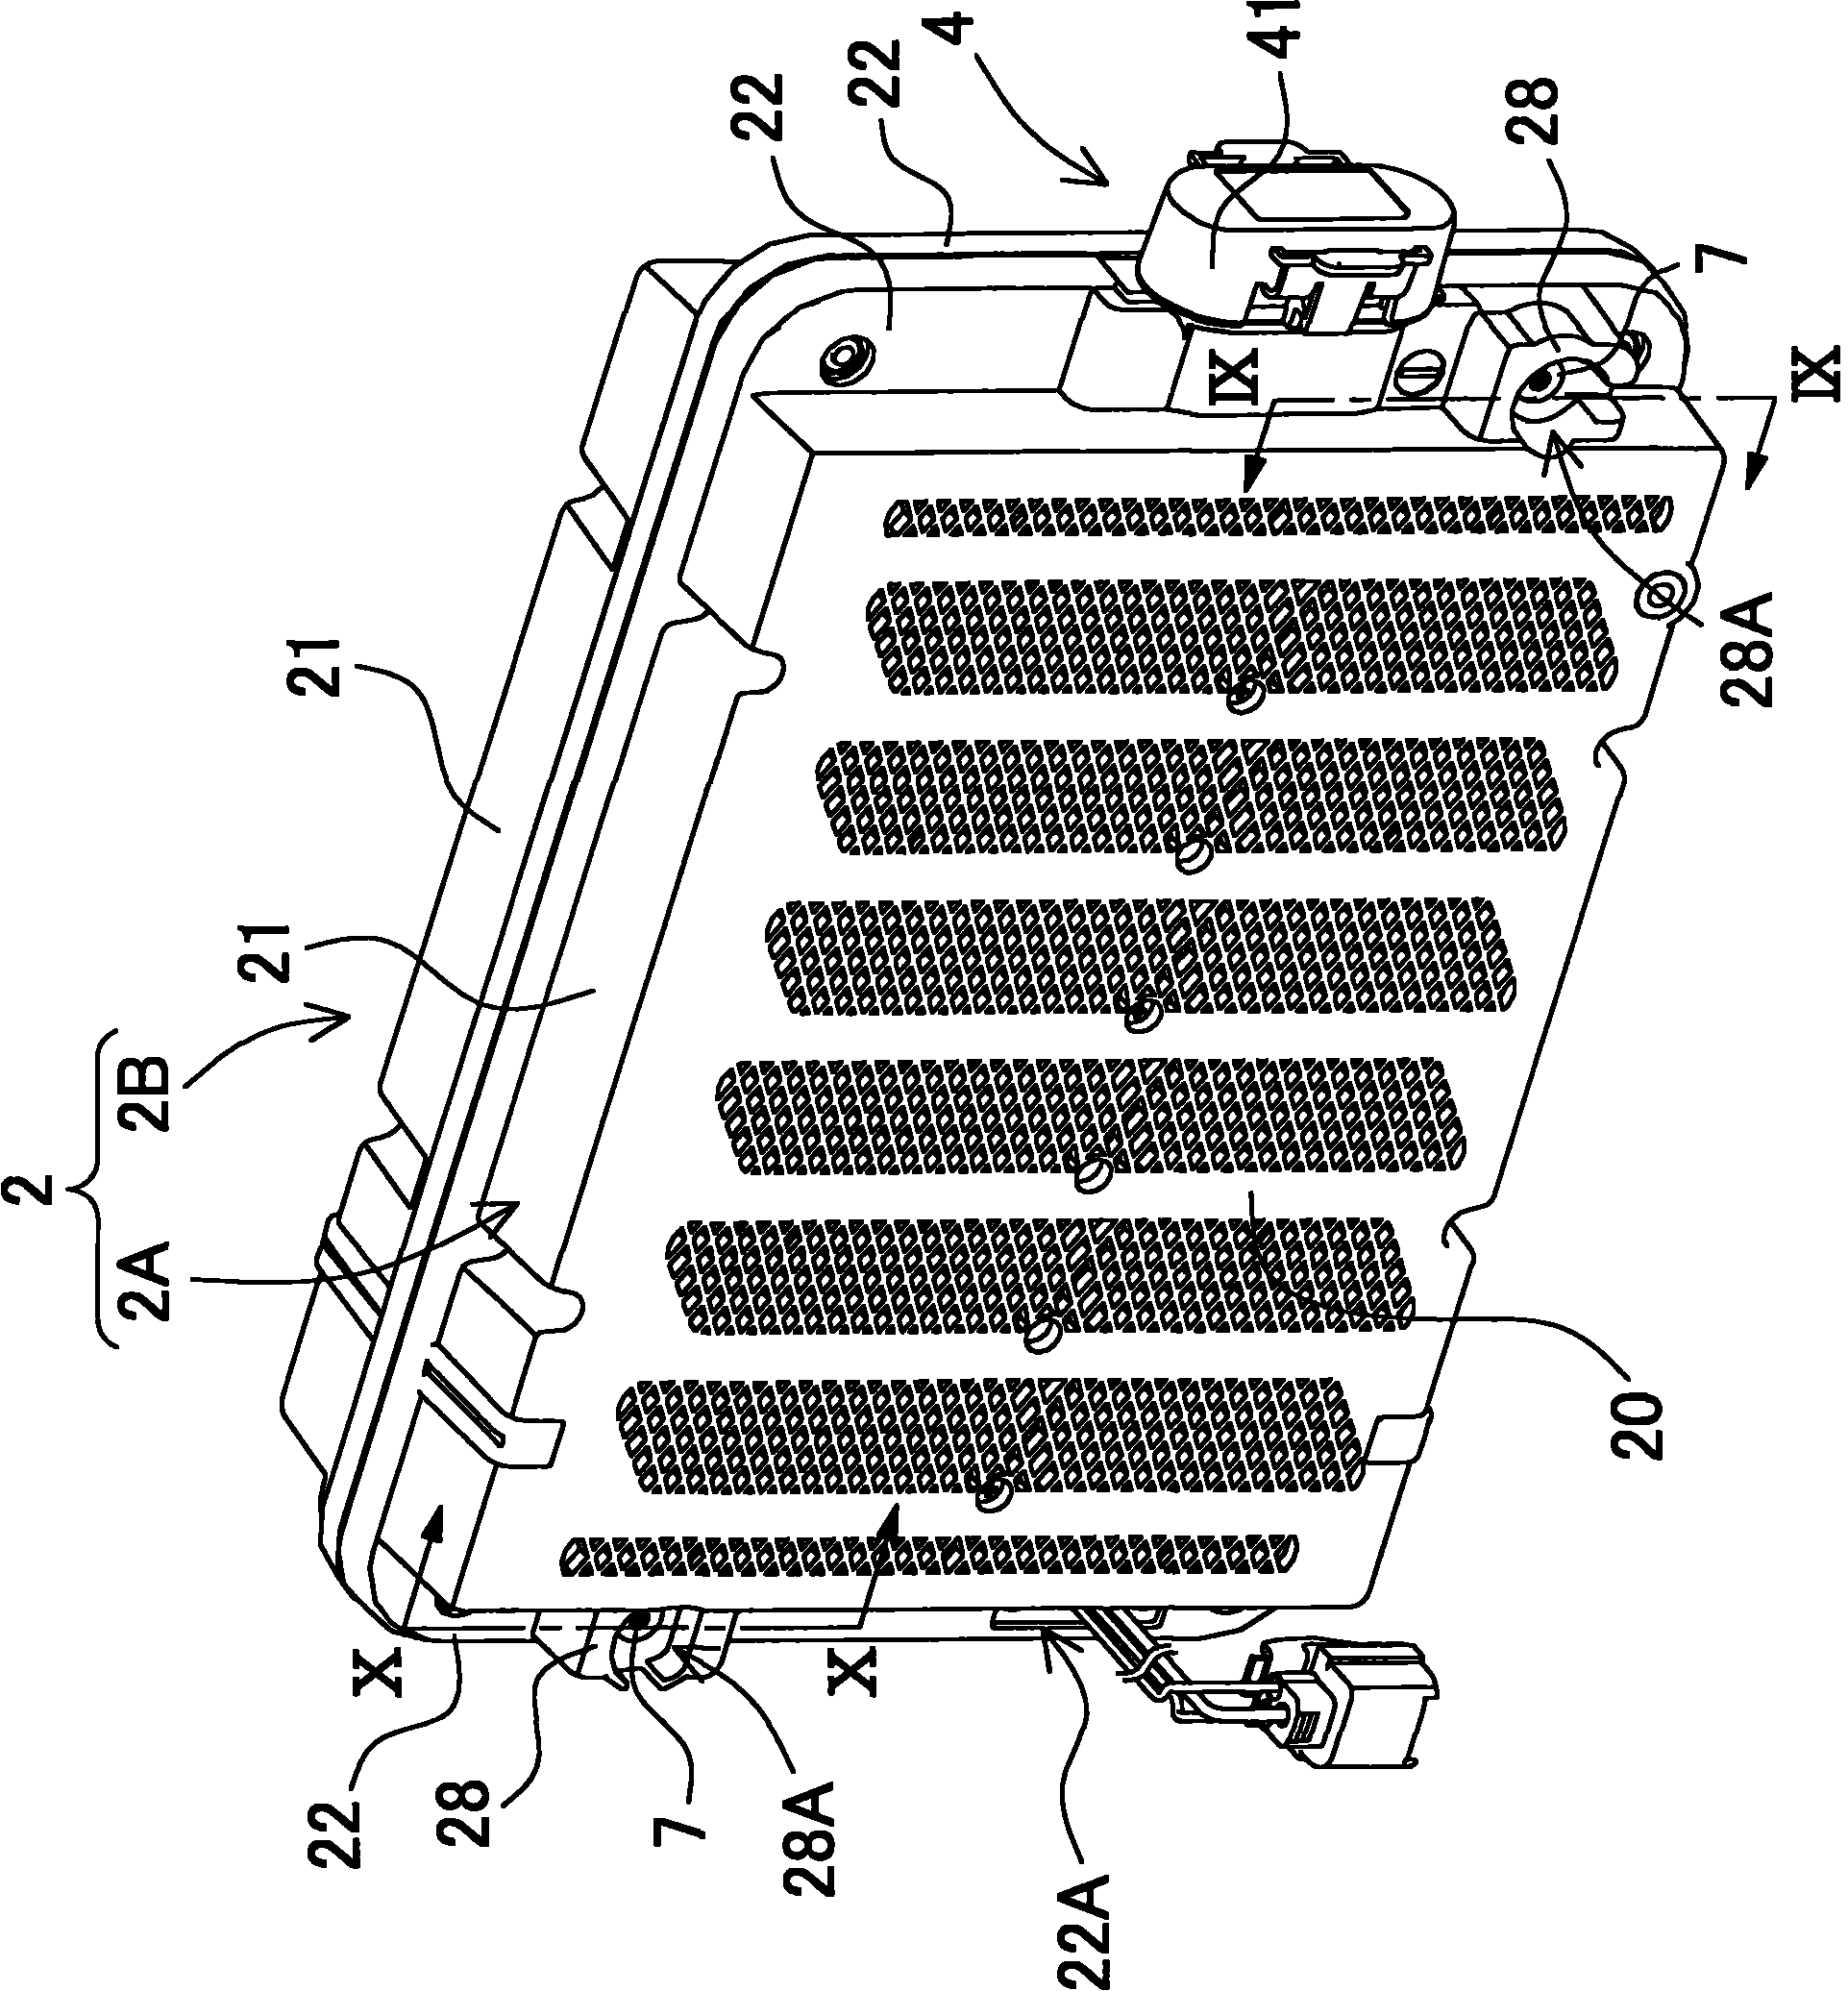 Water-tight battery system